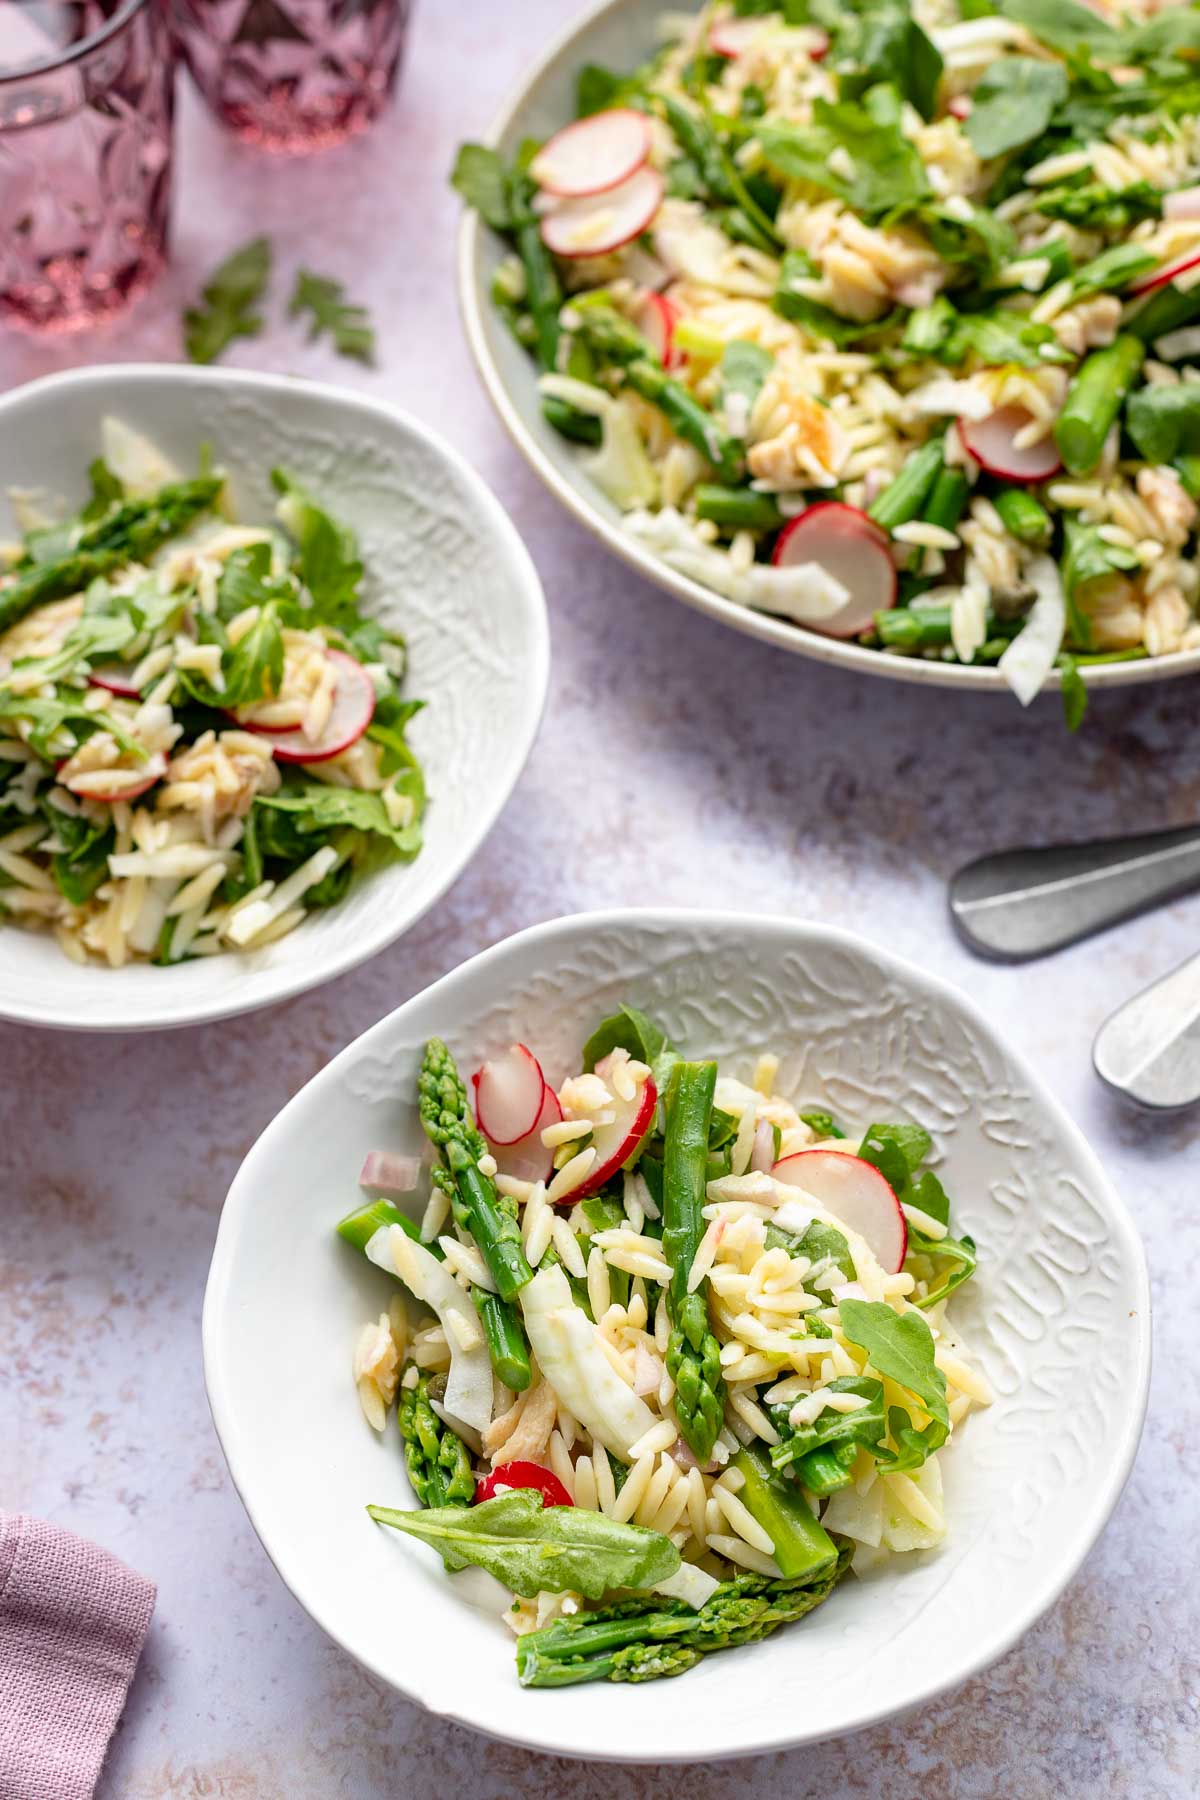 Pasta salad with smoked trout & asparagus, fennel, capers